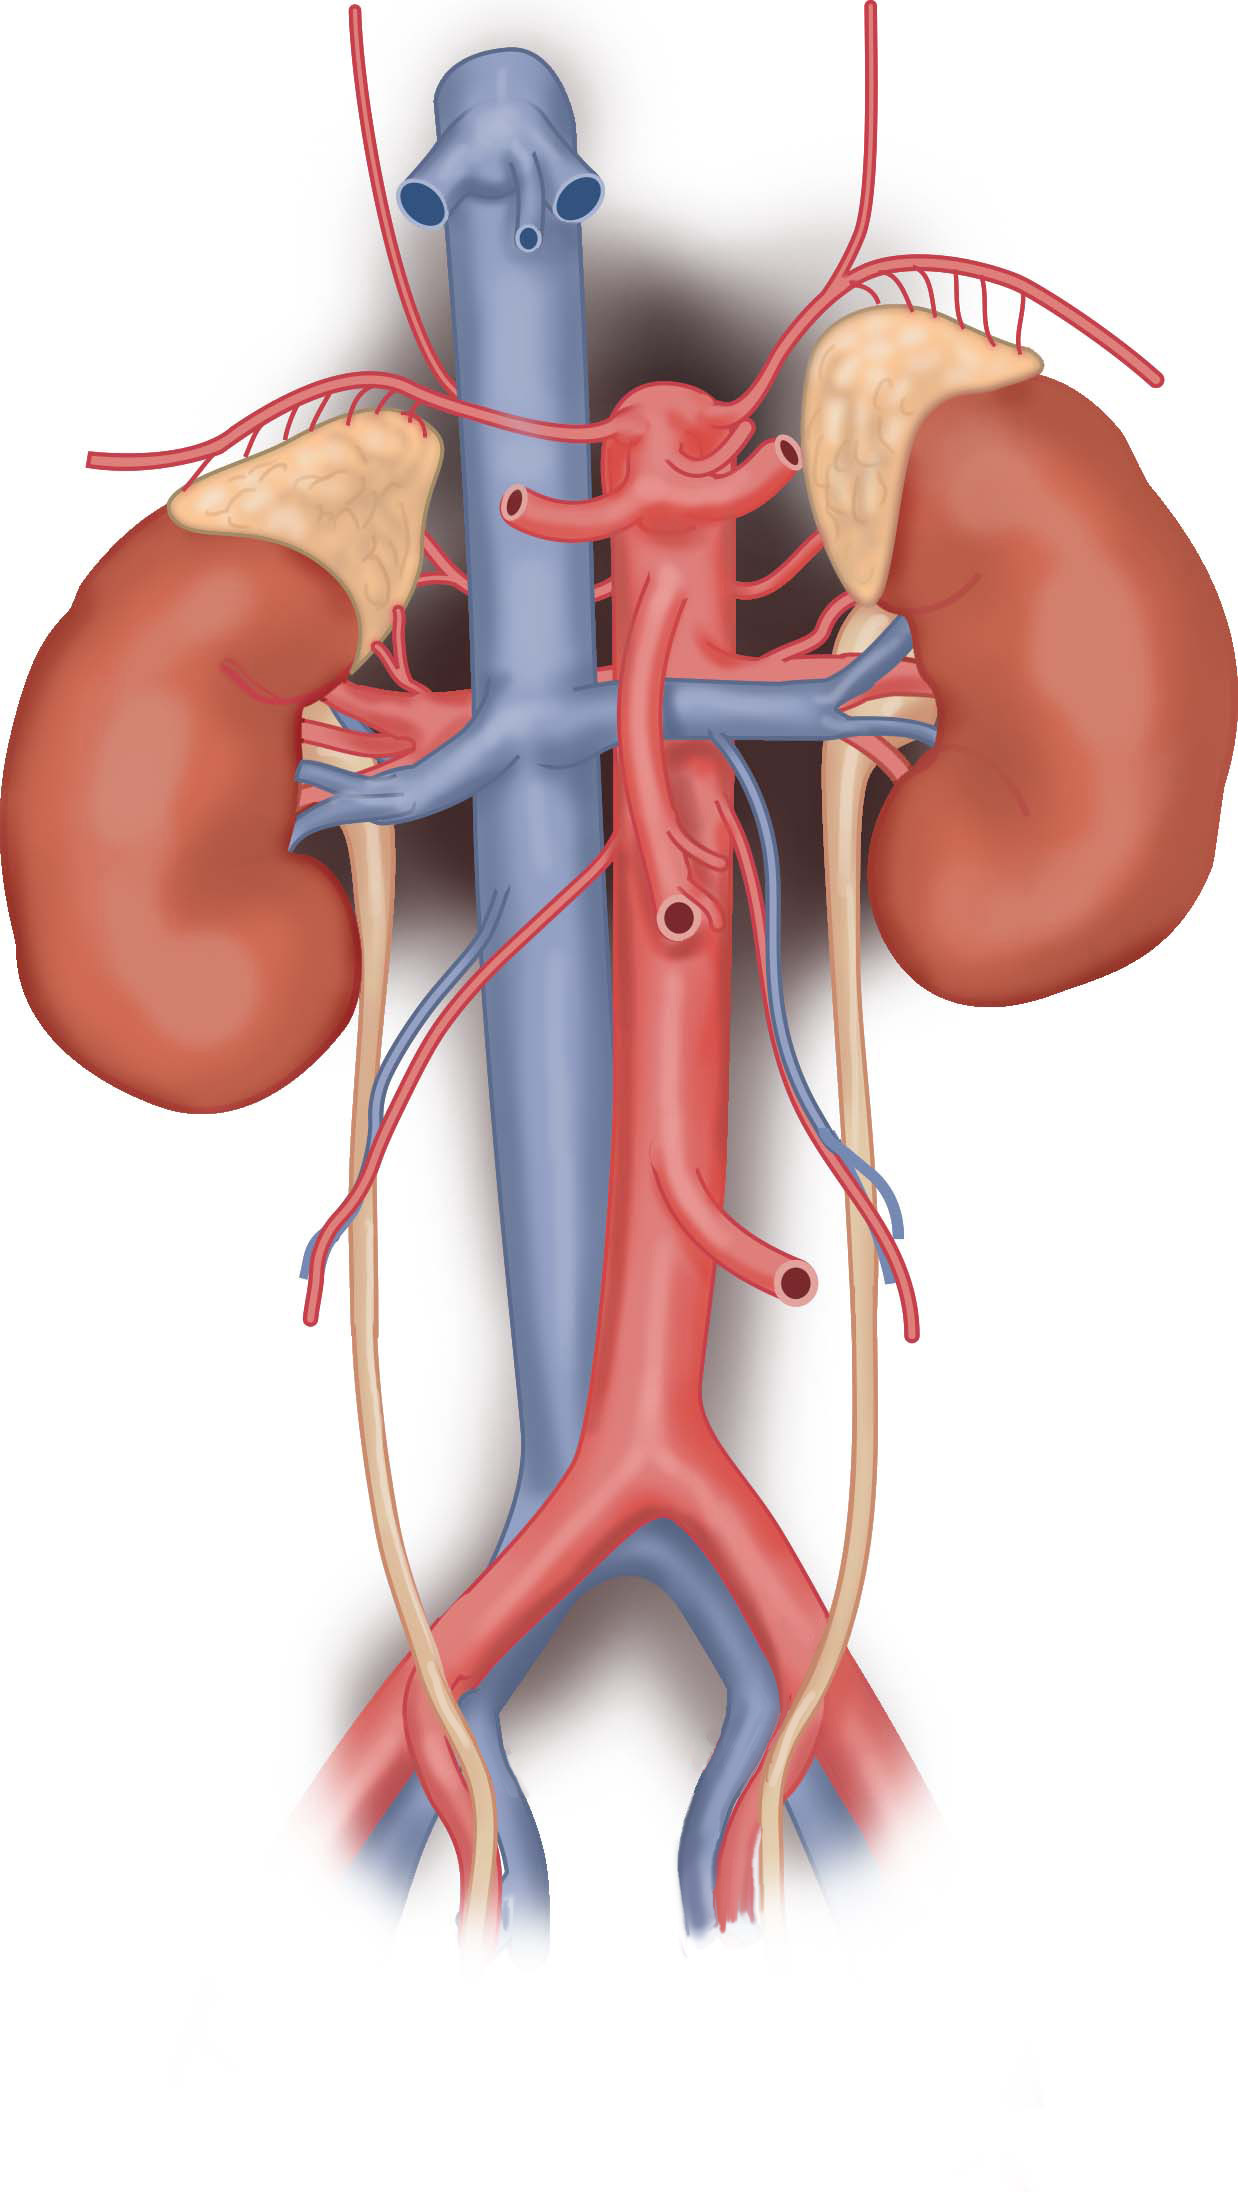 Kidneys and suprarenal glands with vasculature